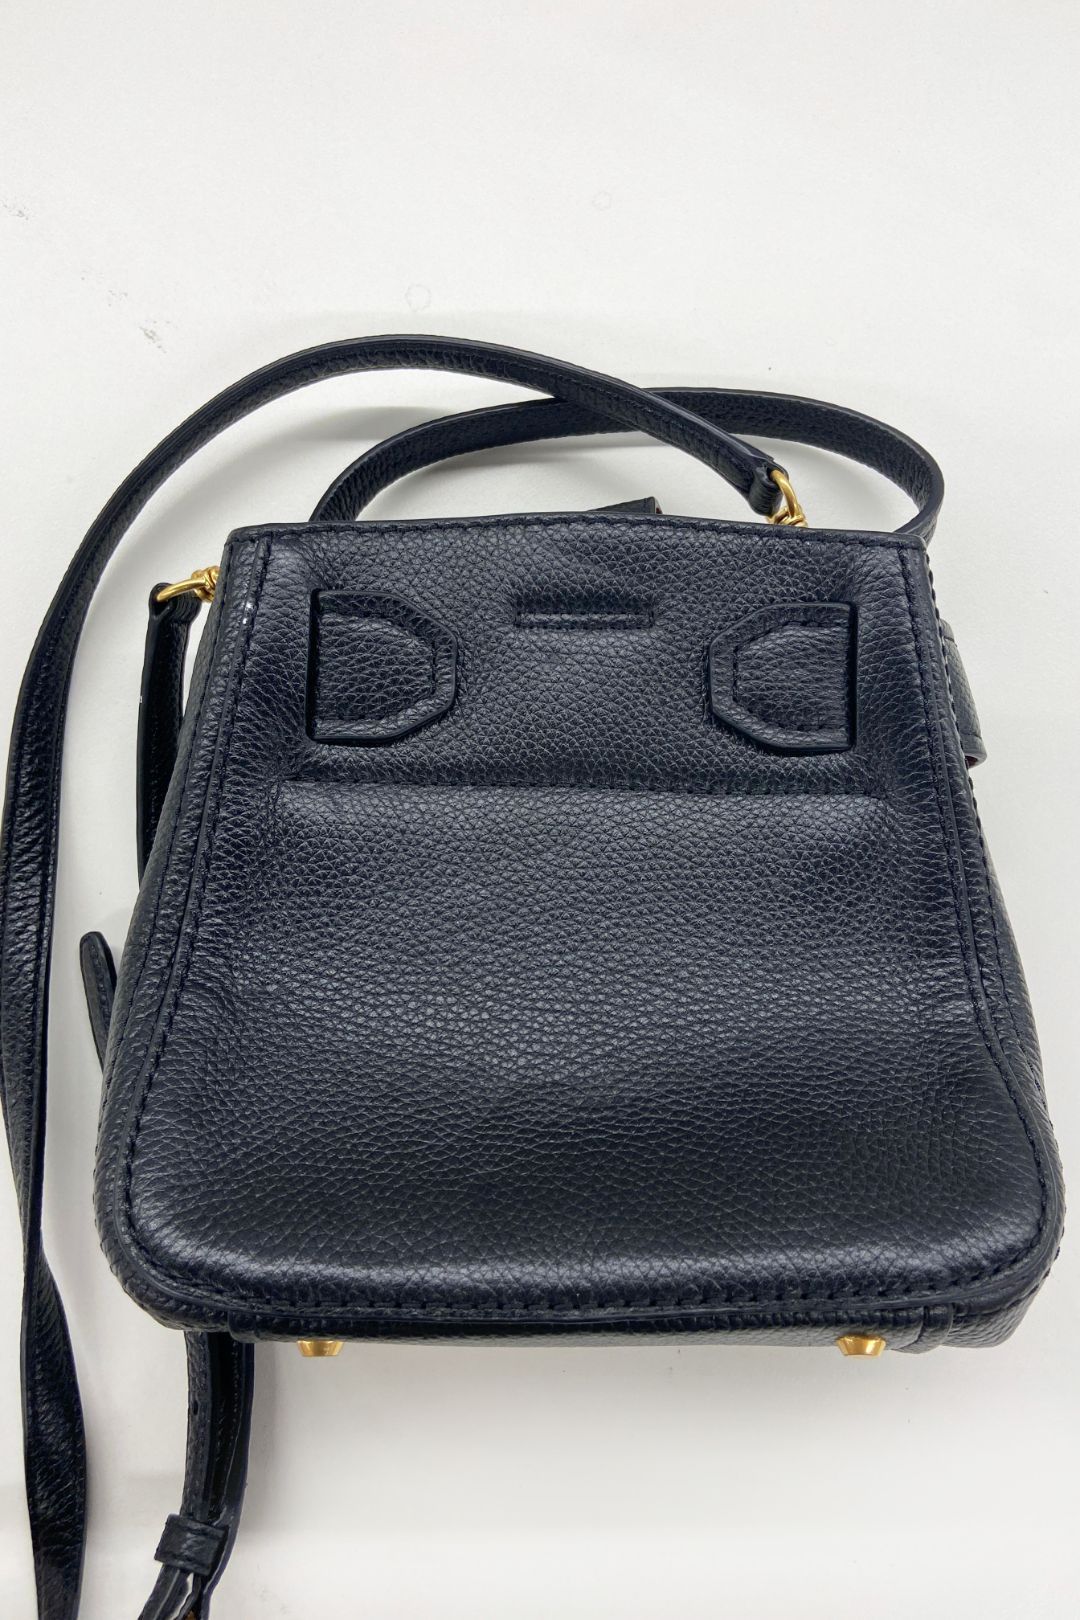 Oroton Avery Leather Bag in Black